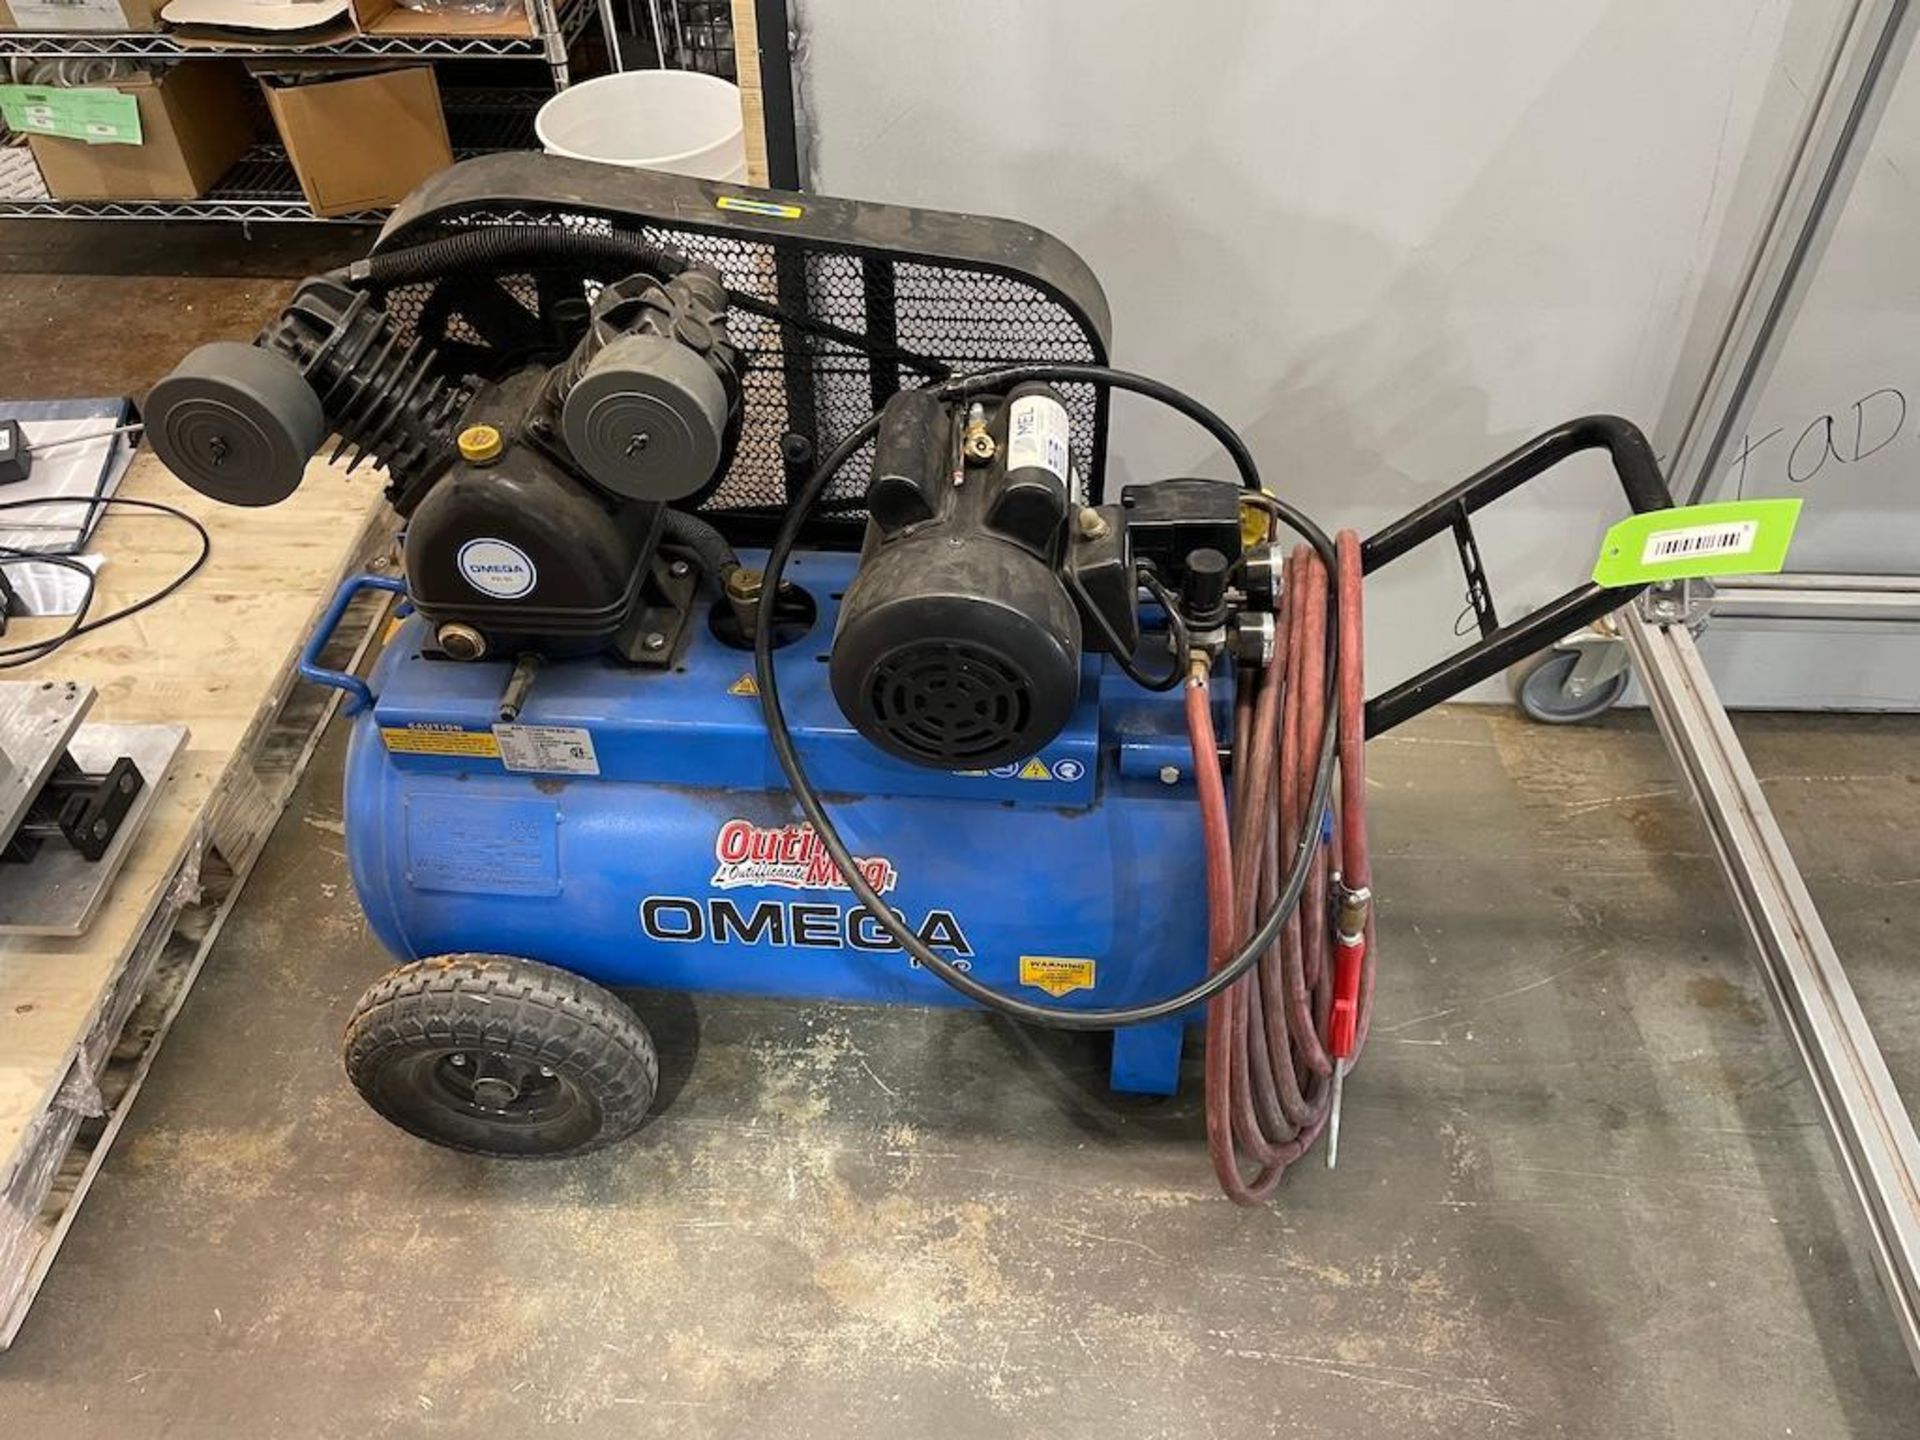 OMEGA PRO 2 HP PORTABLE AIR COMPRESSOR [TROIS RIVIERES] *PLEASE NOTE, EXCLUSIVE RIGGING FEE OF $50 W